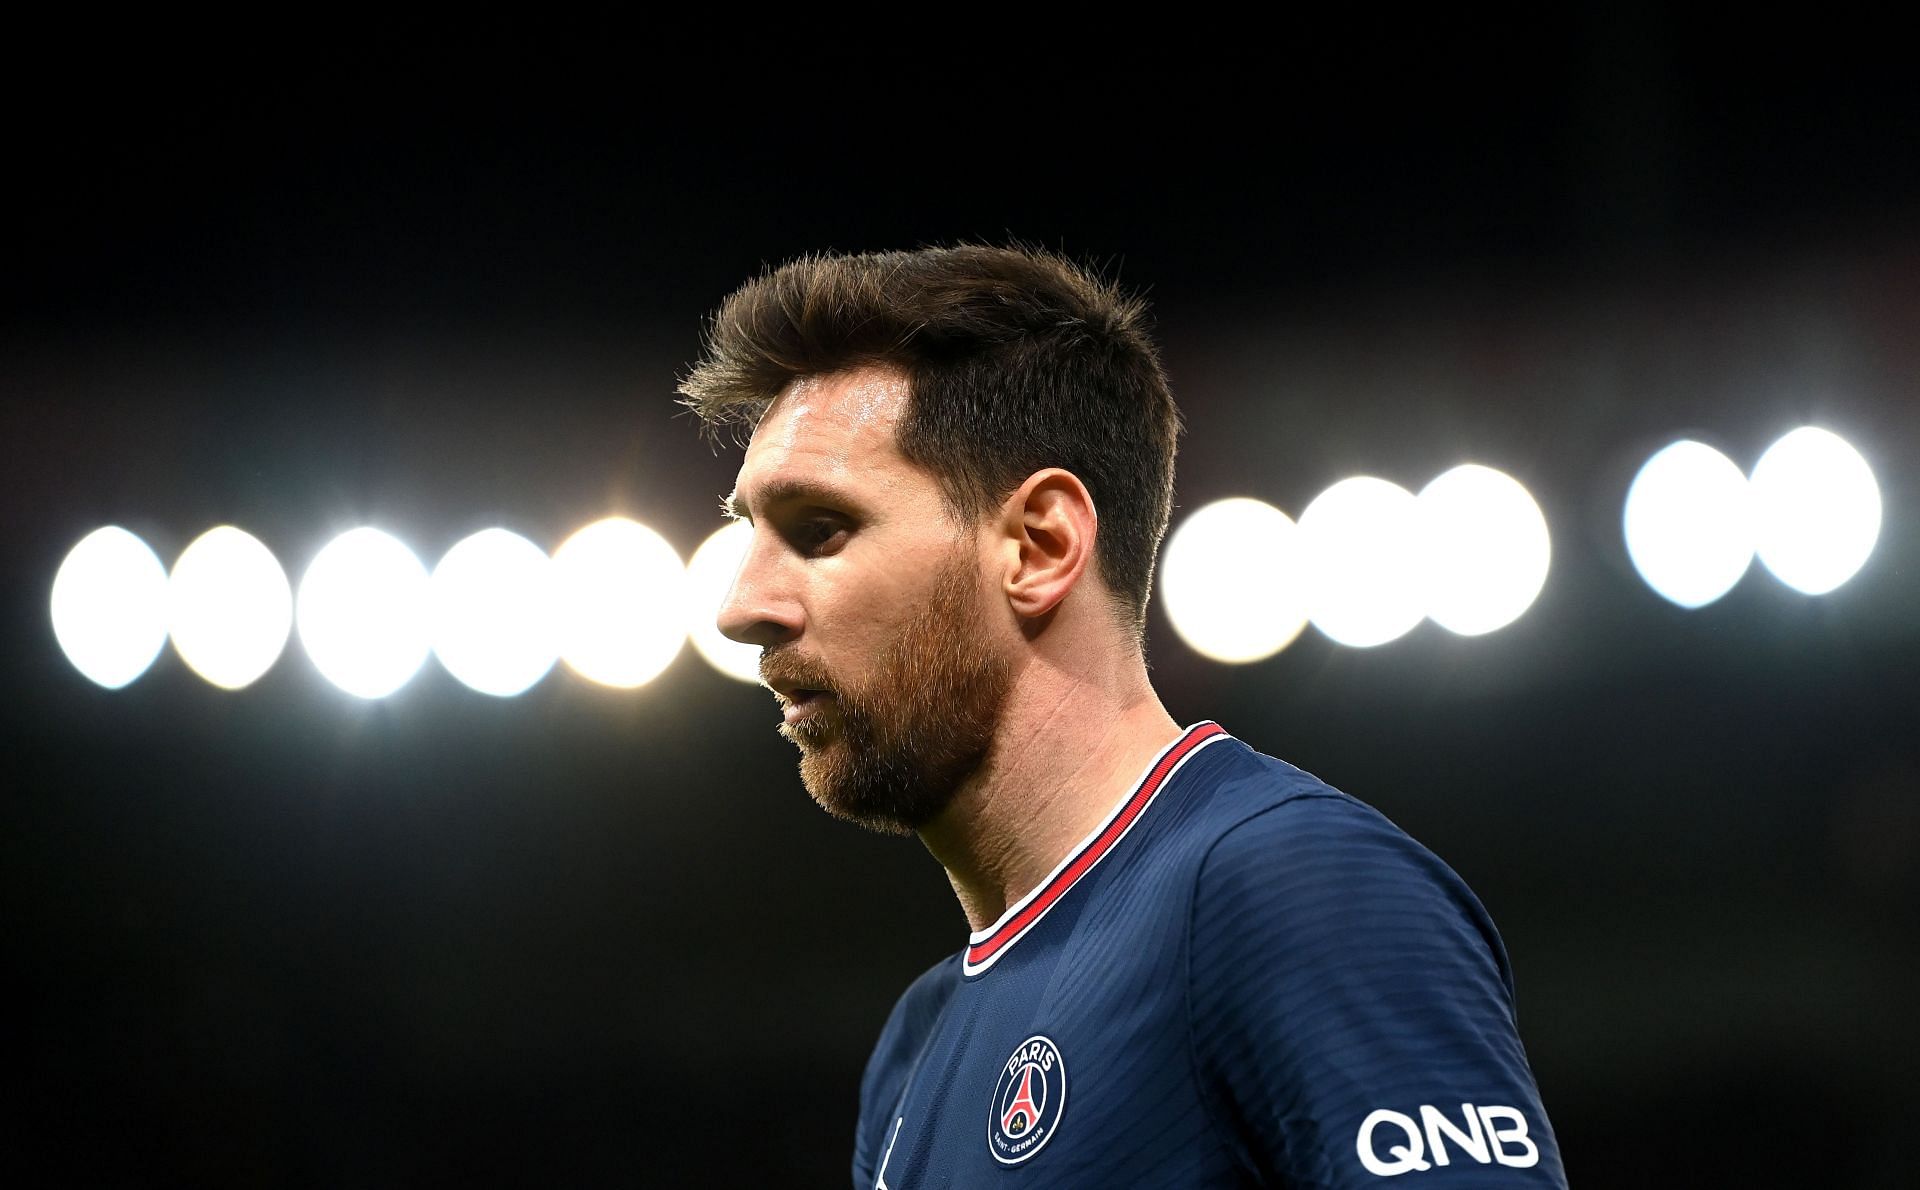 Messi is expected to start against his fimilar foe. (Photo by Shaun Botterill/Getty Images)